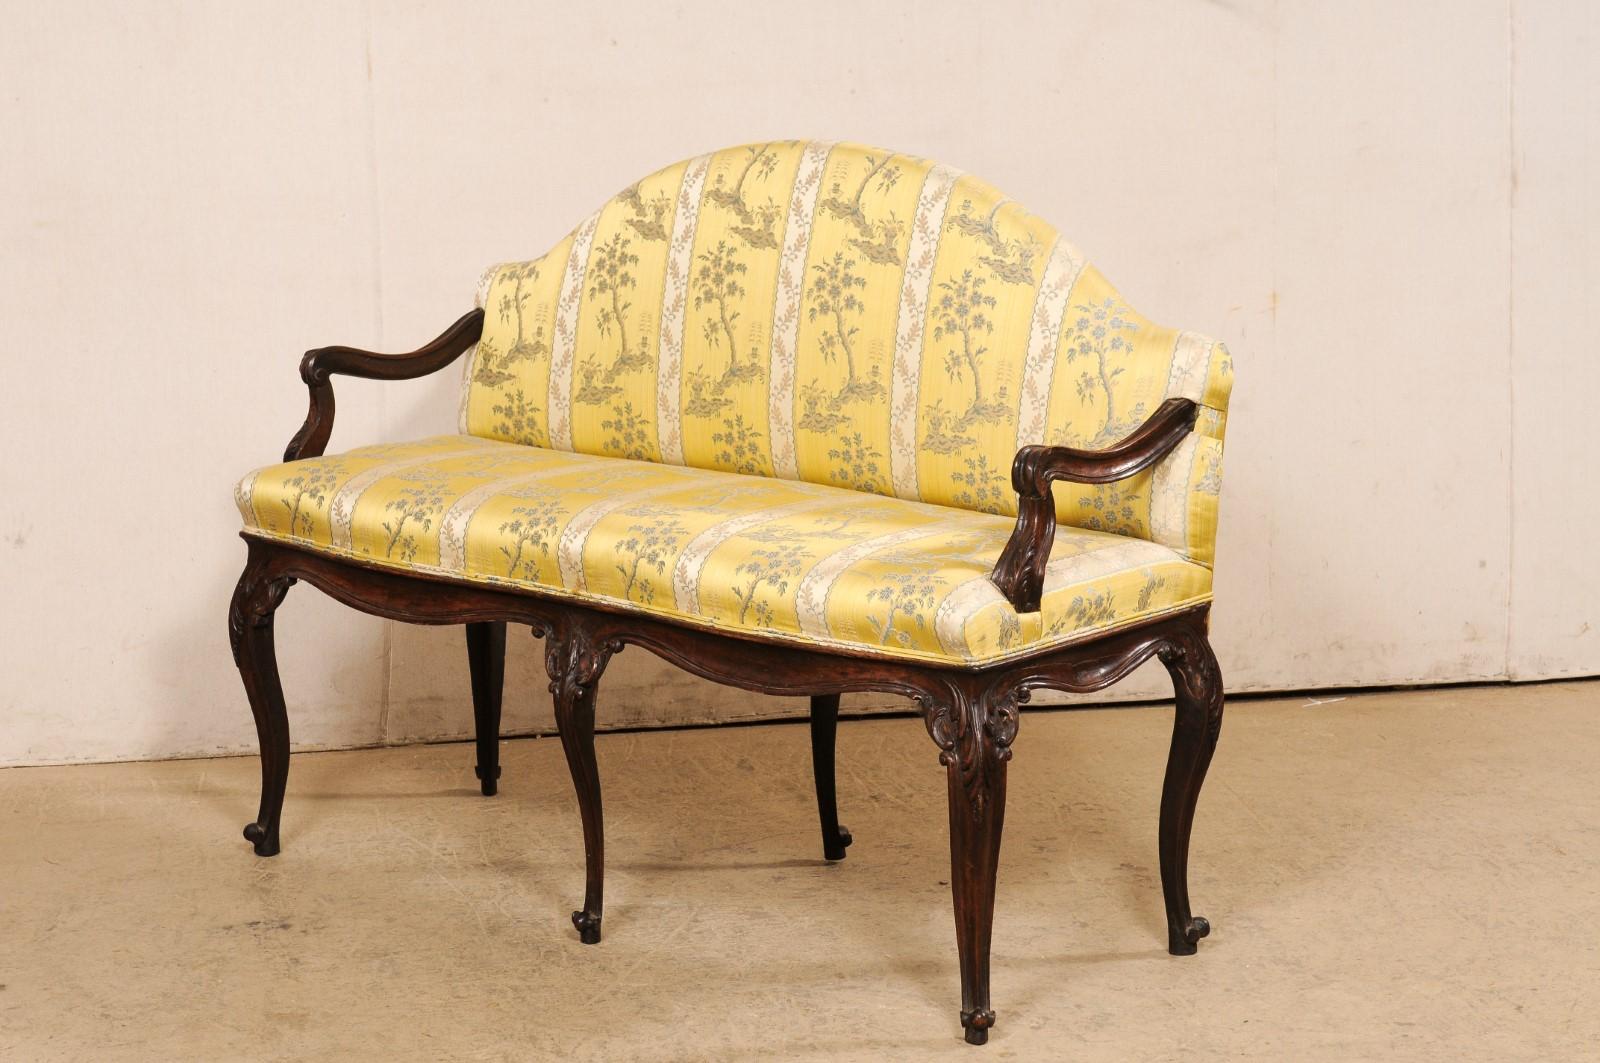 An Italian Carved-Wood & Upholstered Settee, Turn of 18th/19th Century For Sale 7